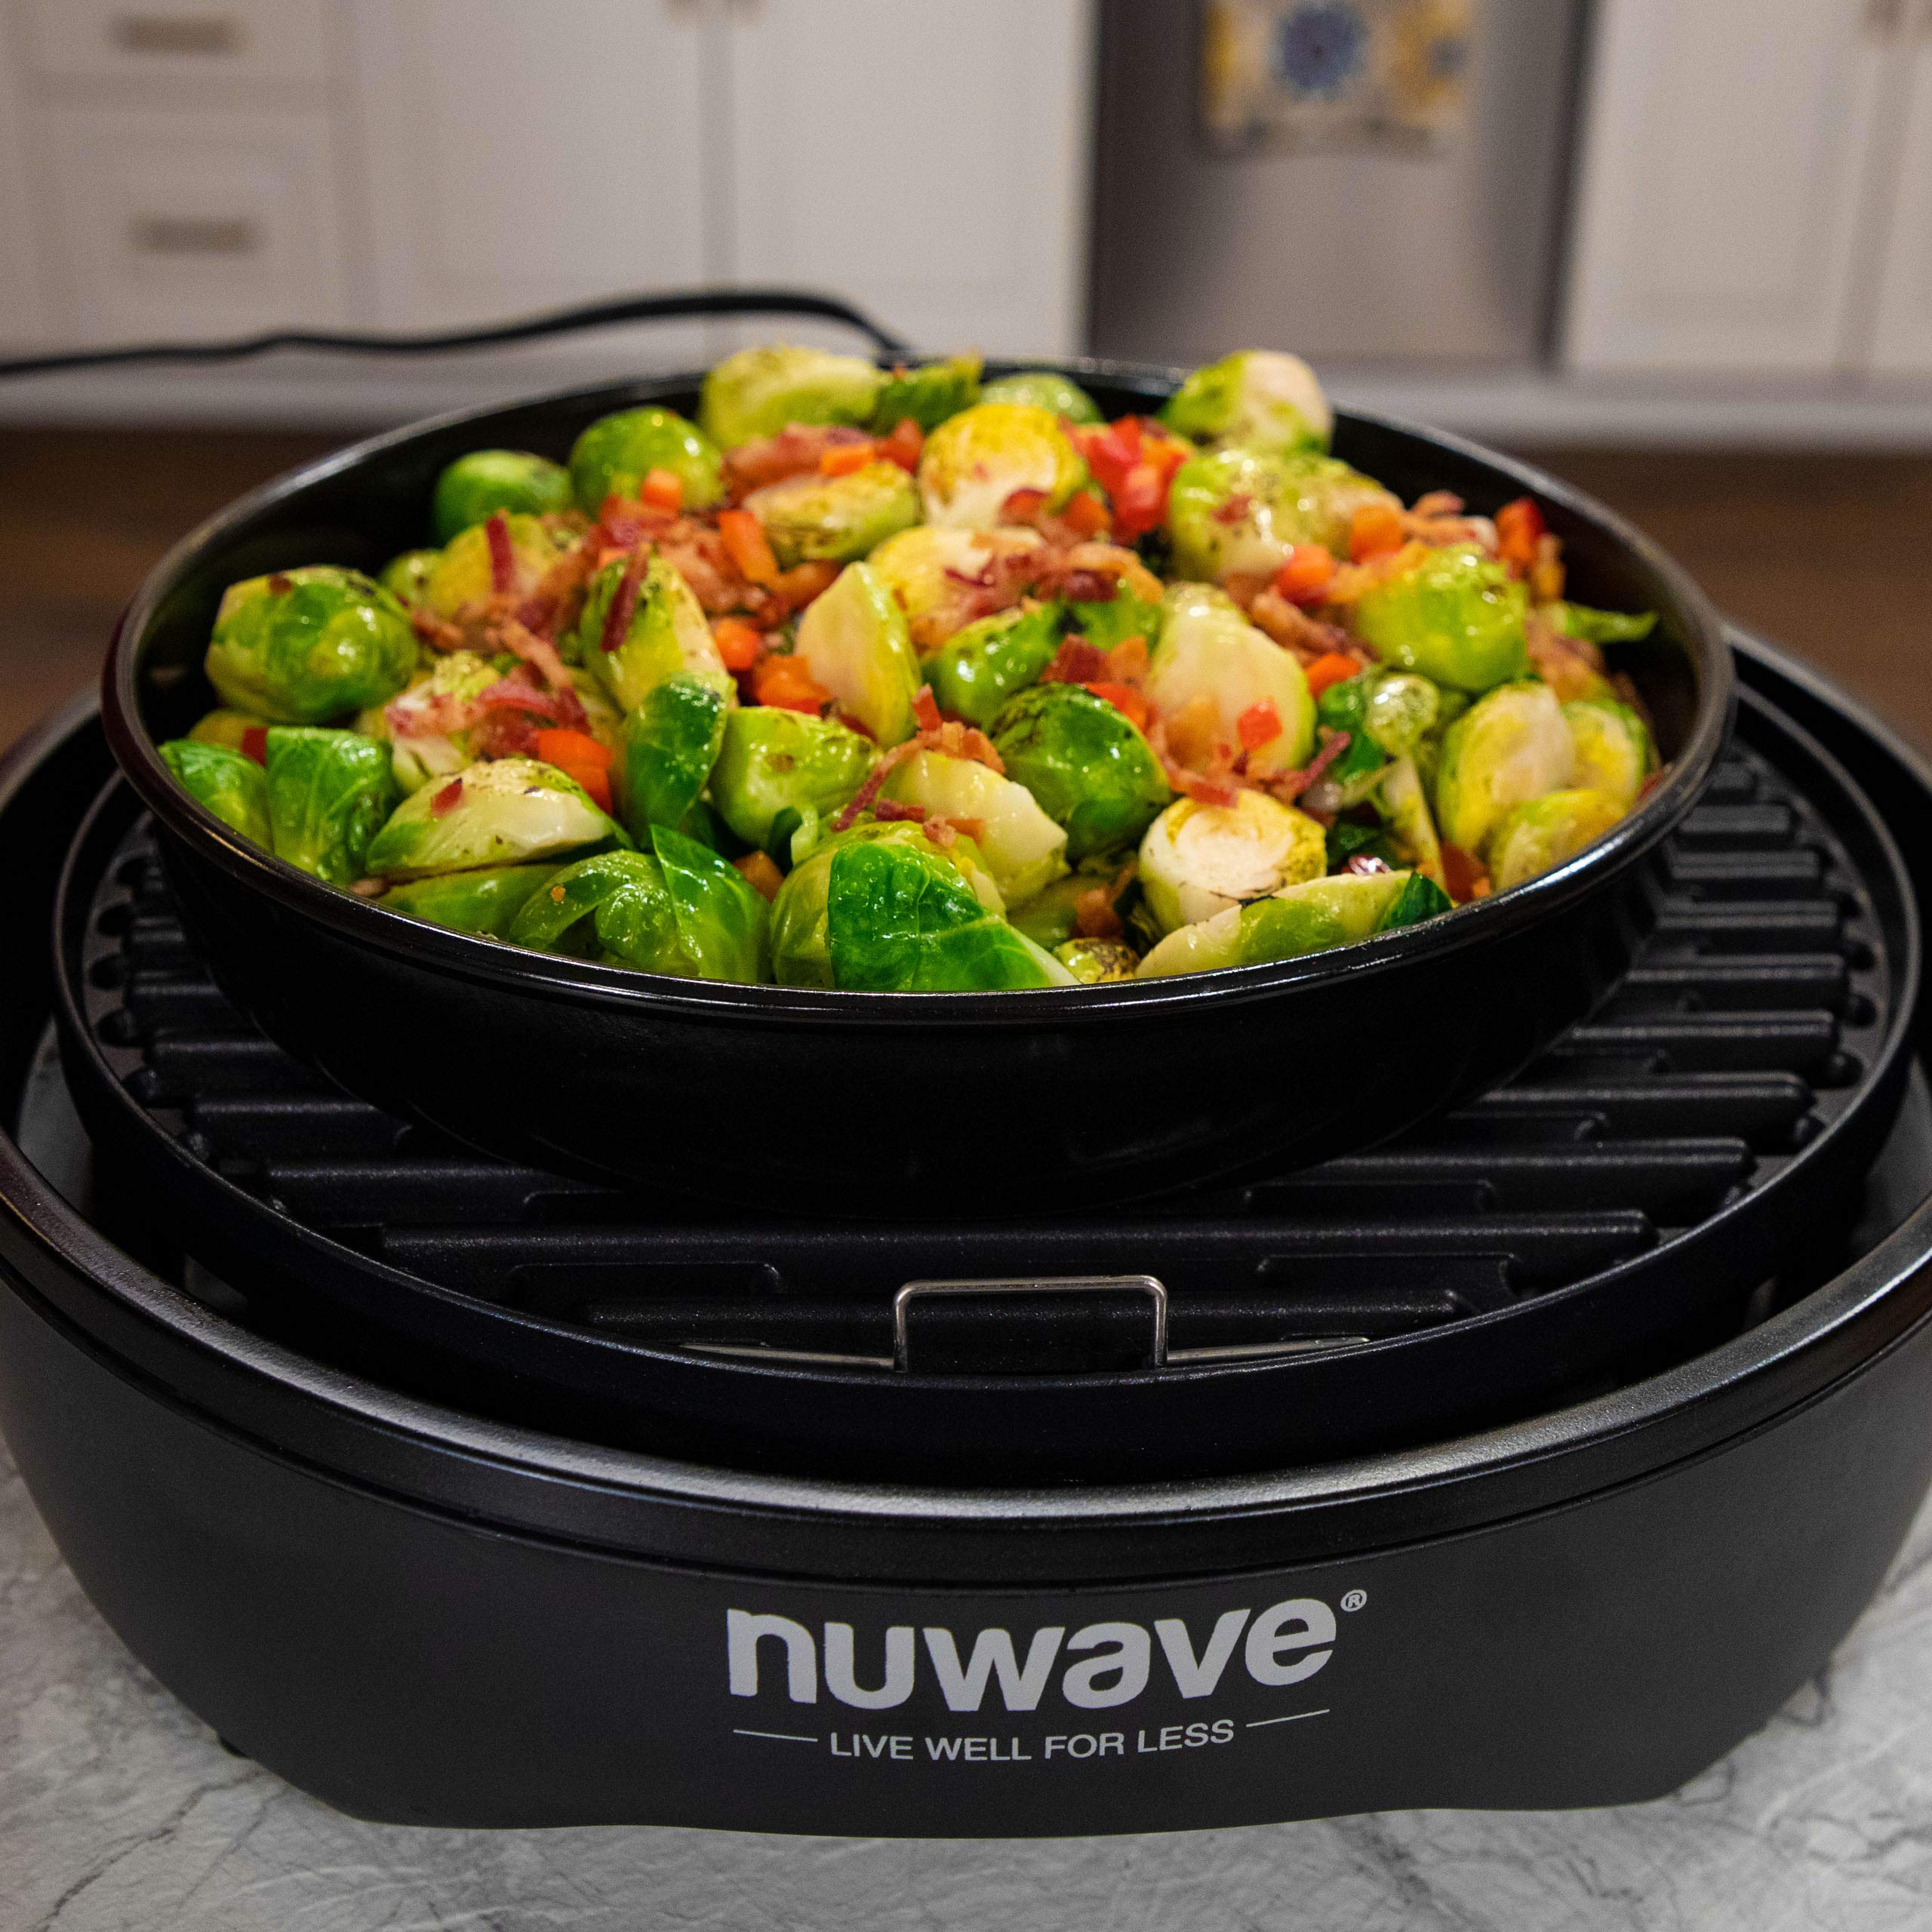 Nuwave Primo Extender Ring Kit; Includes 5" Stainless Steel Extender Ring, Reversible 3" Cooking Rack, 10" Enamel Baking Pan & Stainless Steel Air Fry Basket, Compatible with Nuwave Primo Oven